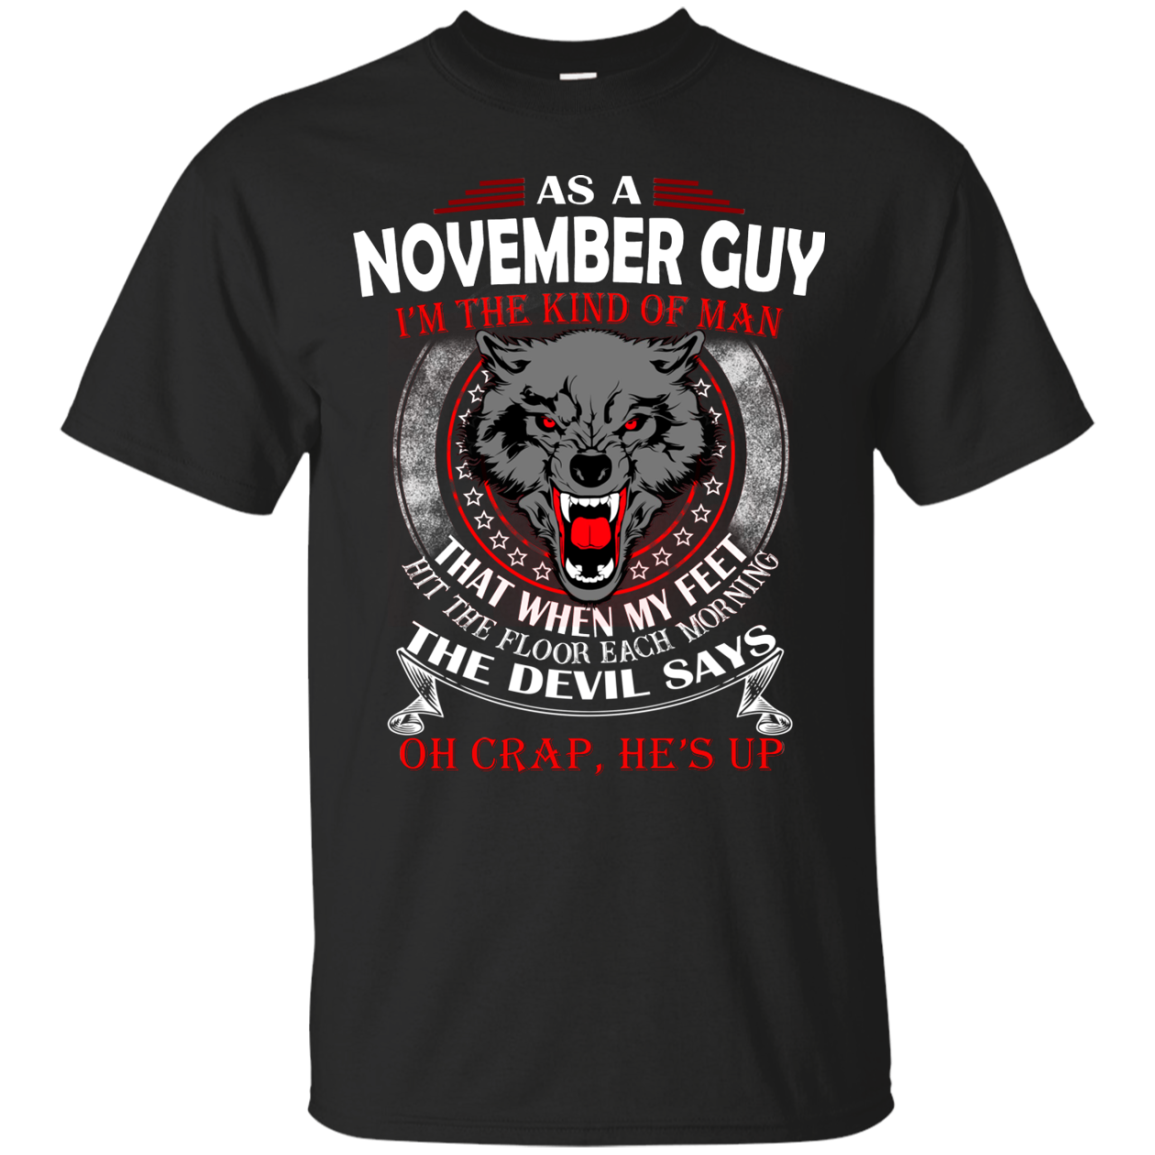 As A November Guy - The Devil Says Oh Crap, He's Up Shirt, Hoodie